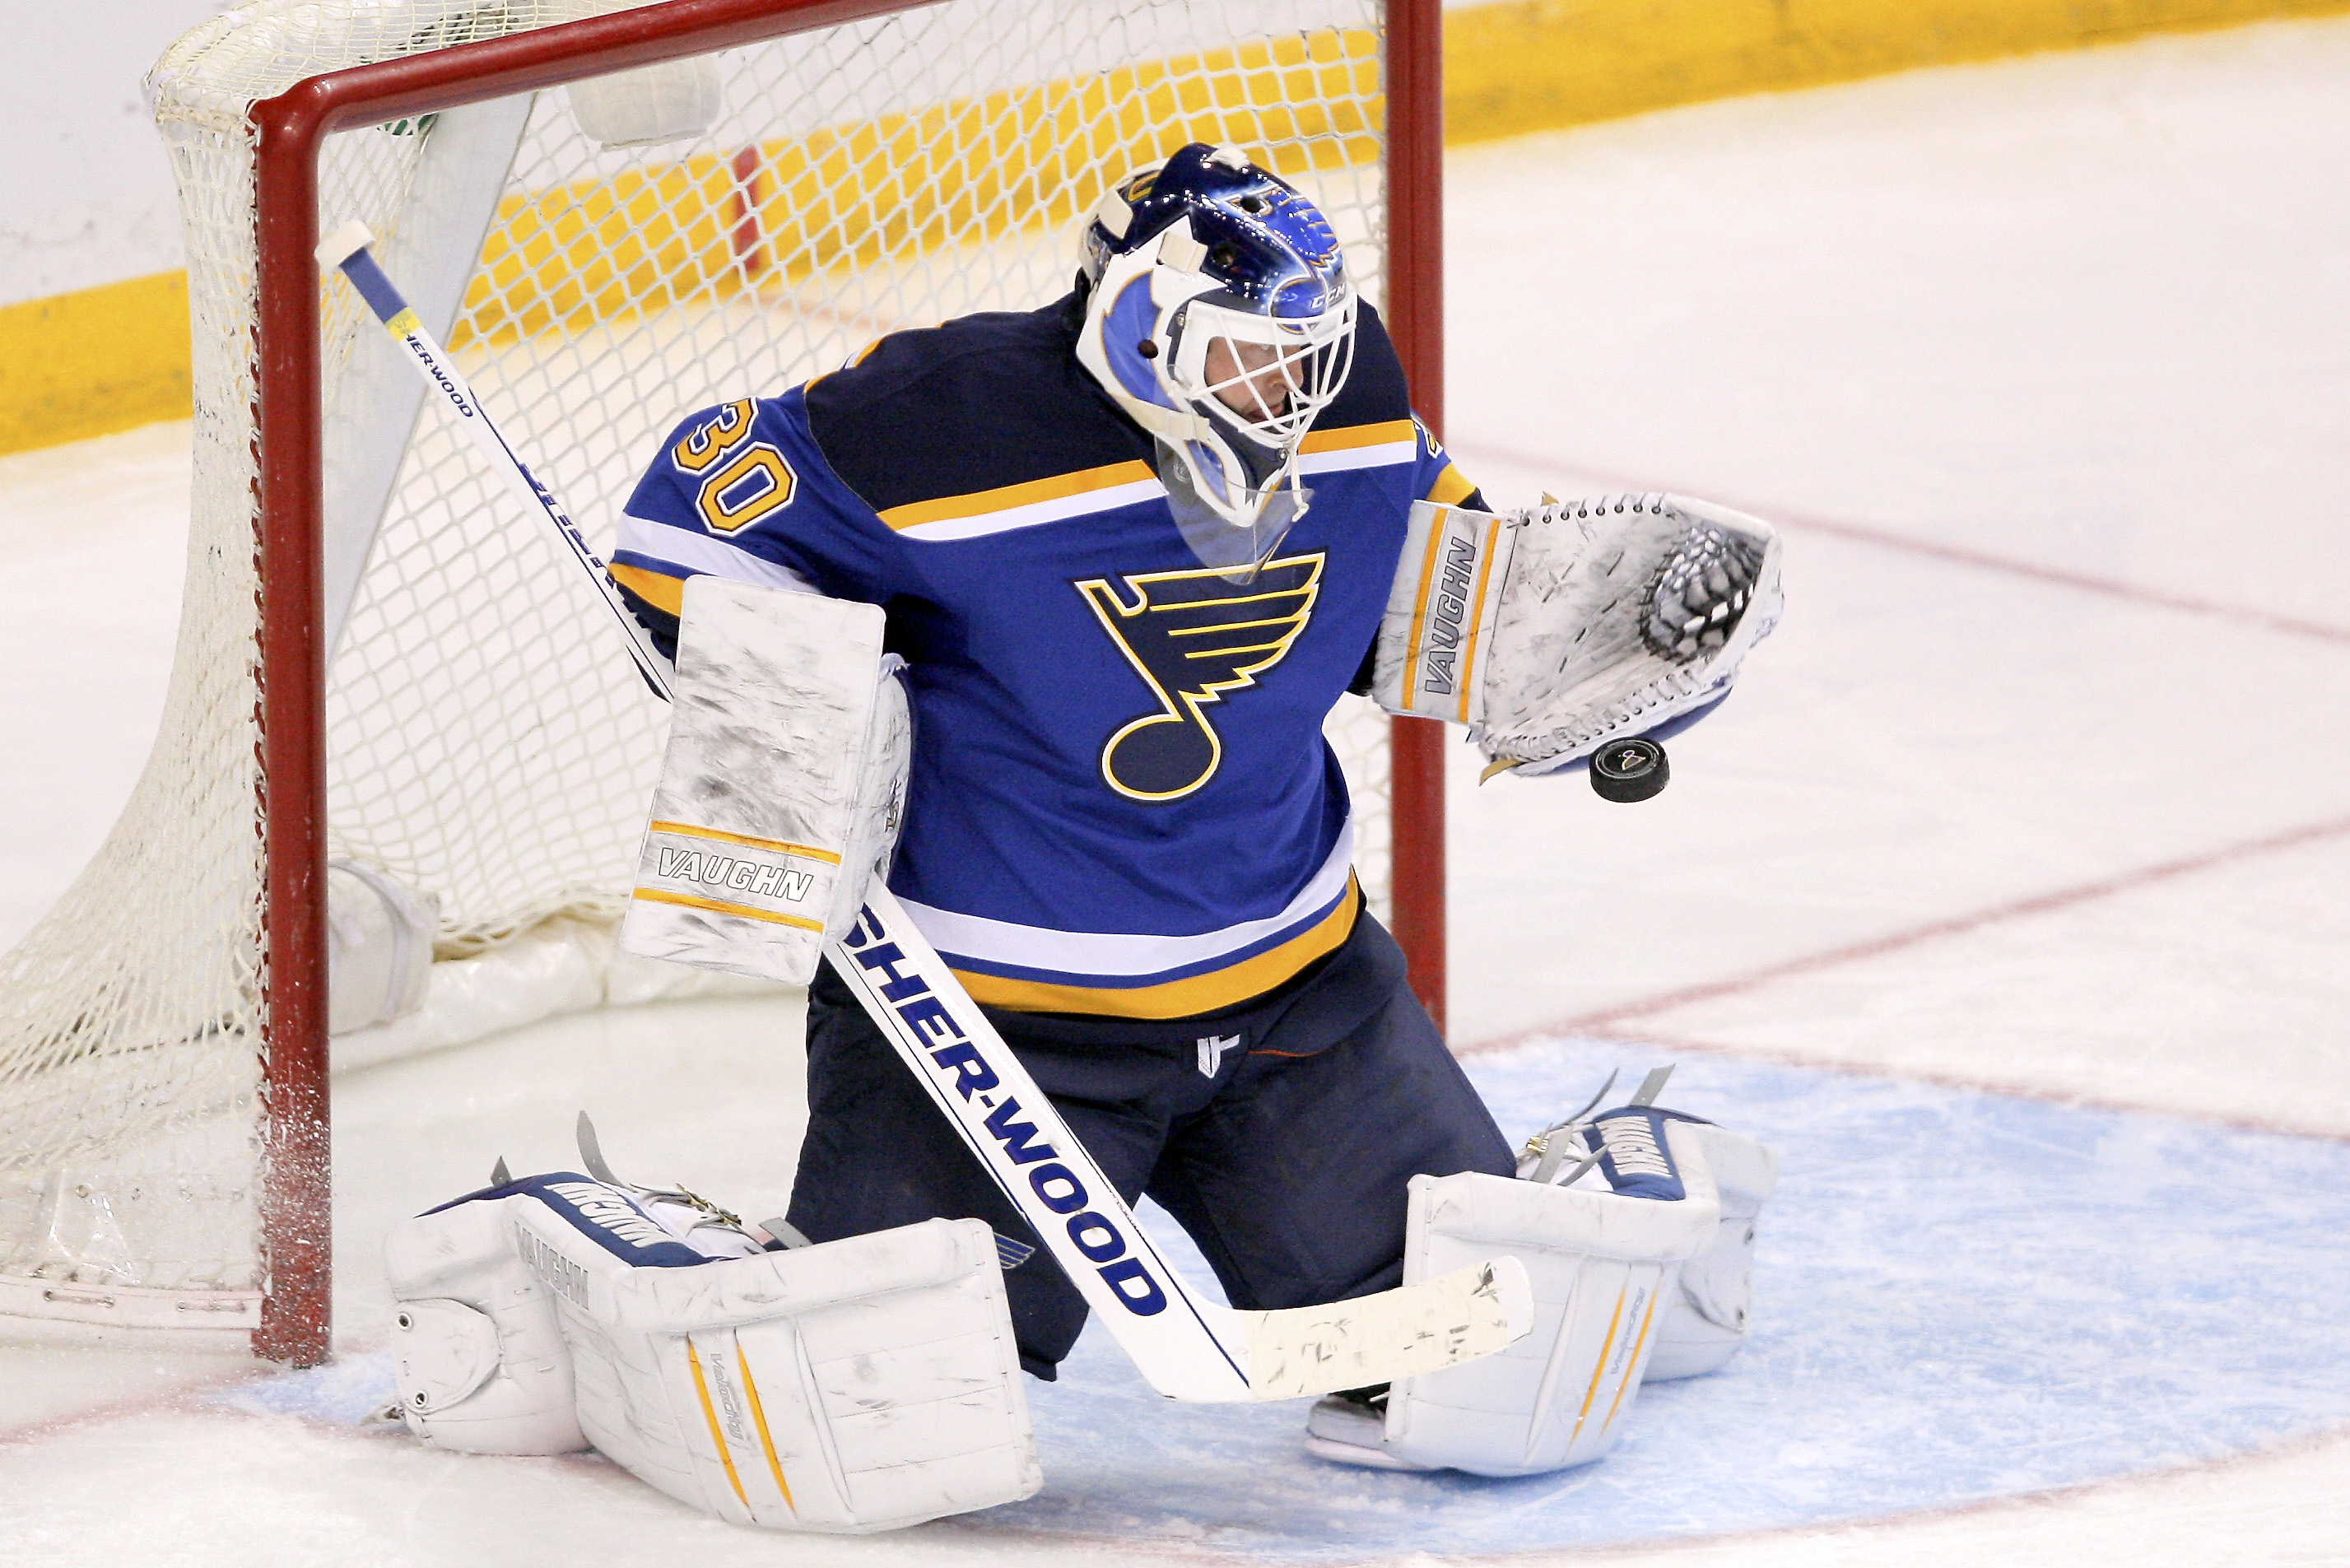 Martin Brodeur Is Set to Retire, but He Will Stay With Blues - The